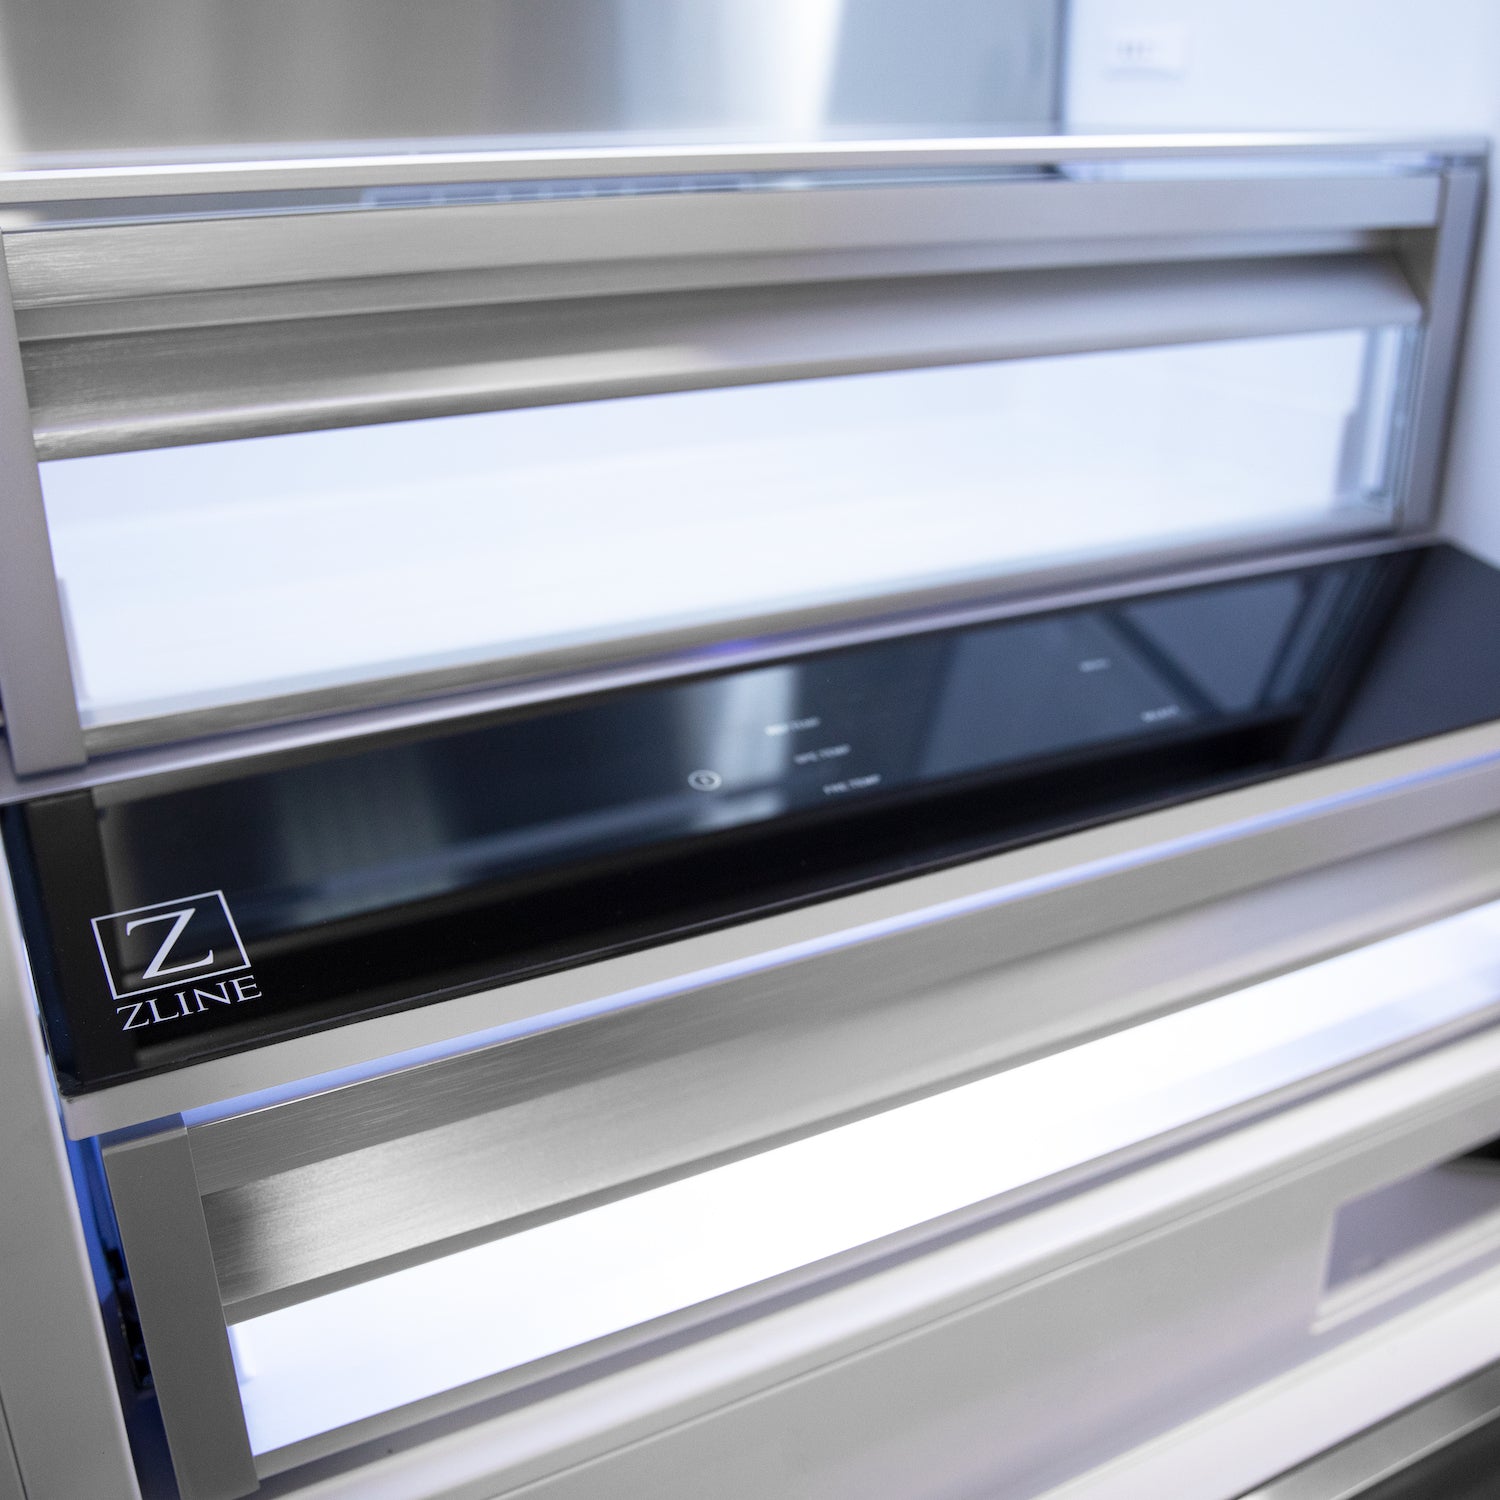 Drawers inside ZLINE built-in refrigerator above temperature controls.